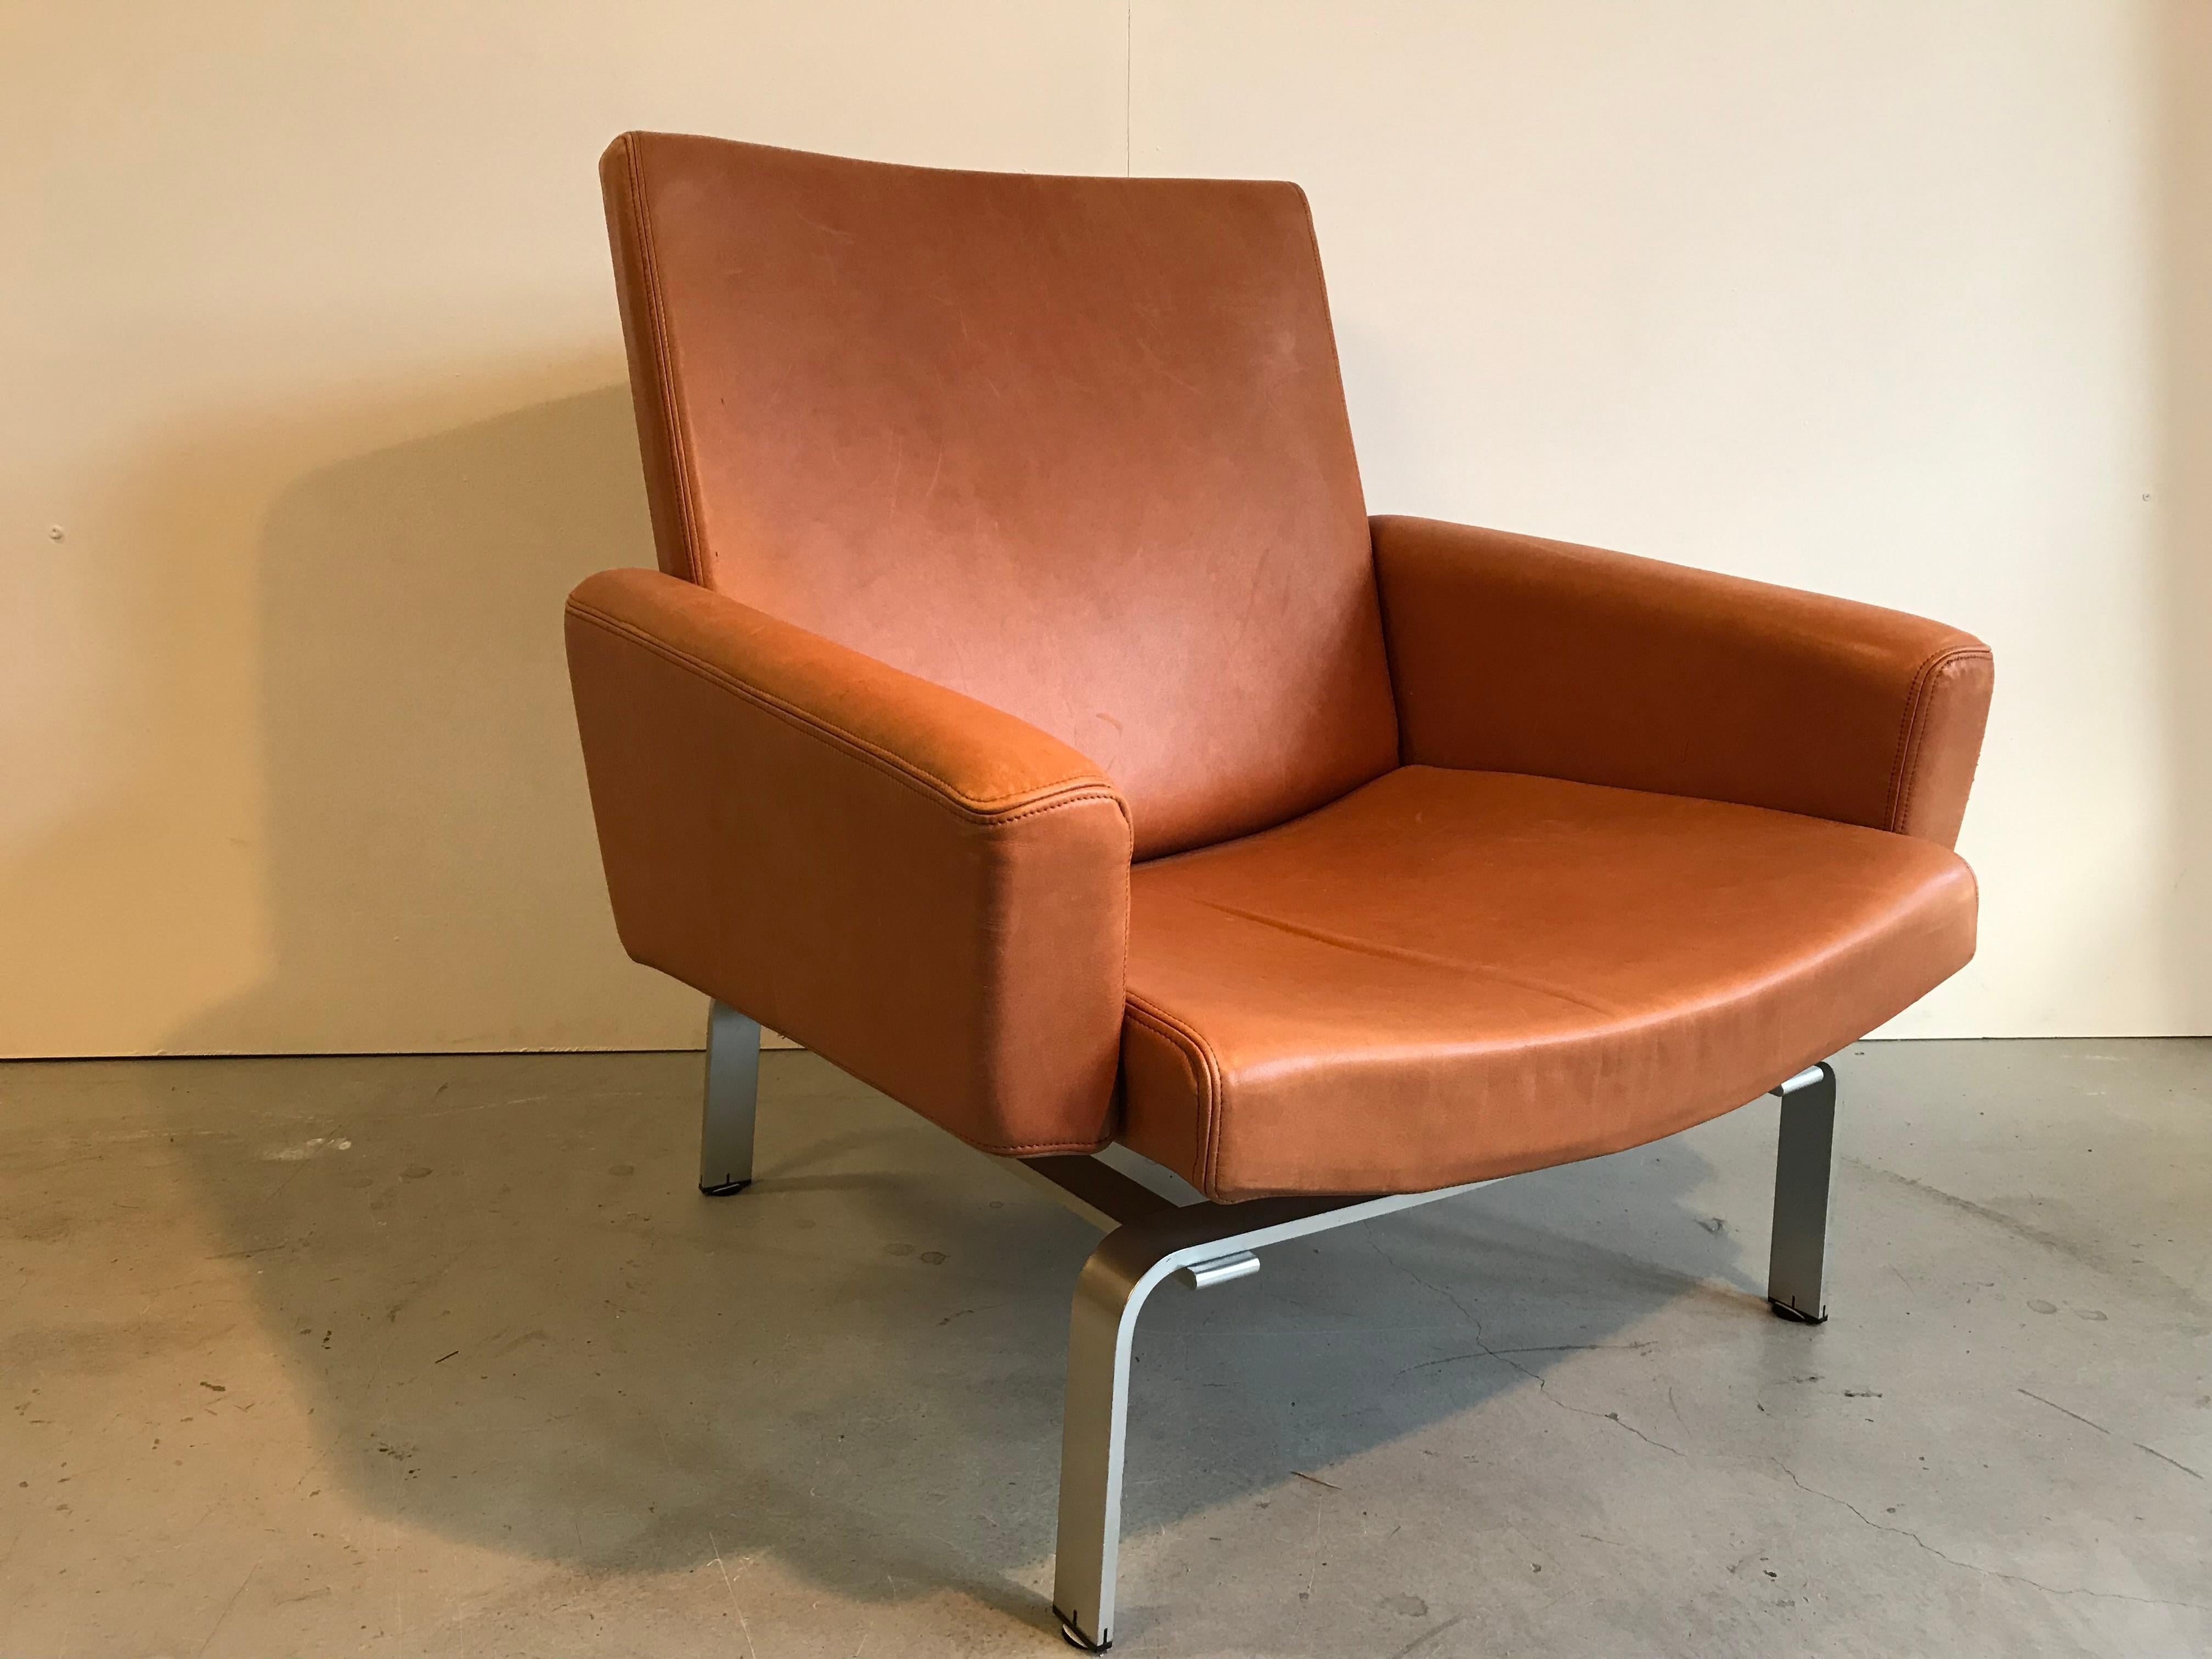 Jorgen Hoj lounge chair. 
Designed for Niels Vitsoe in the 1960s. 

This fine and not easy to find chair is upholstered in natural leather and has solid aluminum feet. 

The leather has great patina, on one armrest however, see photo for